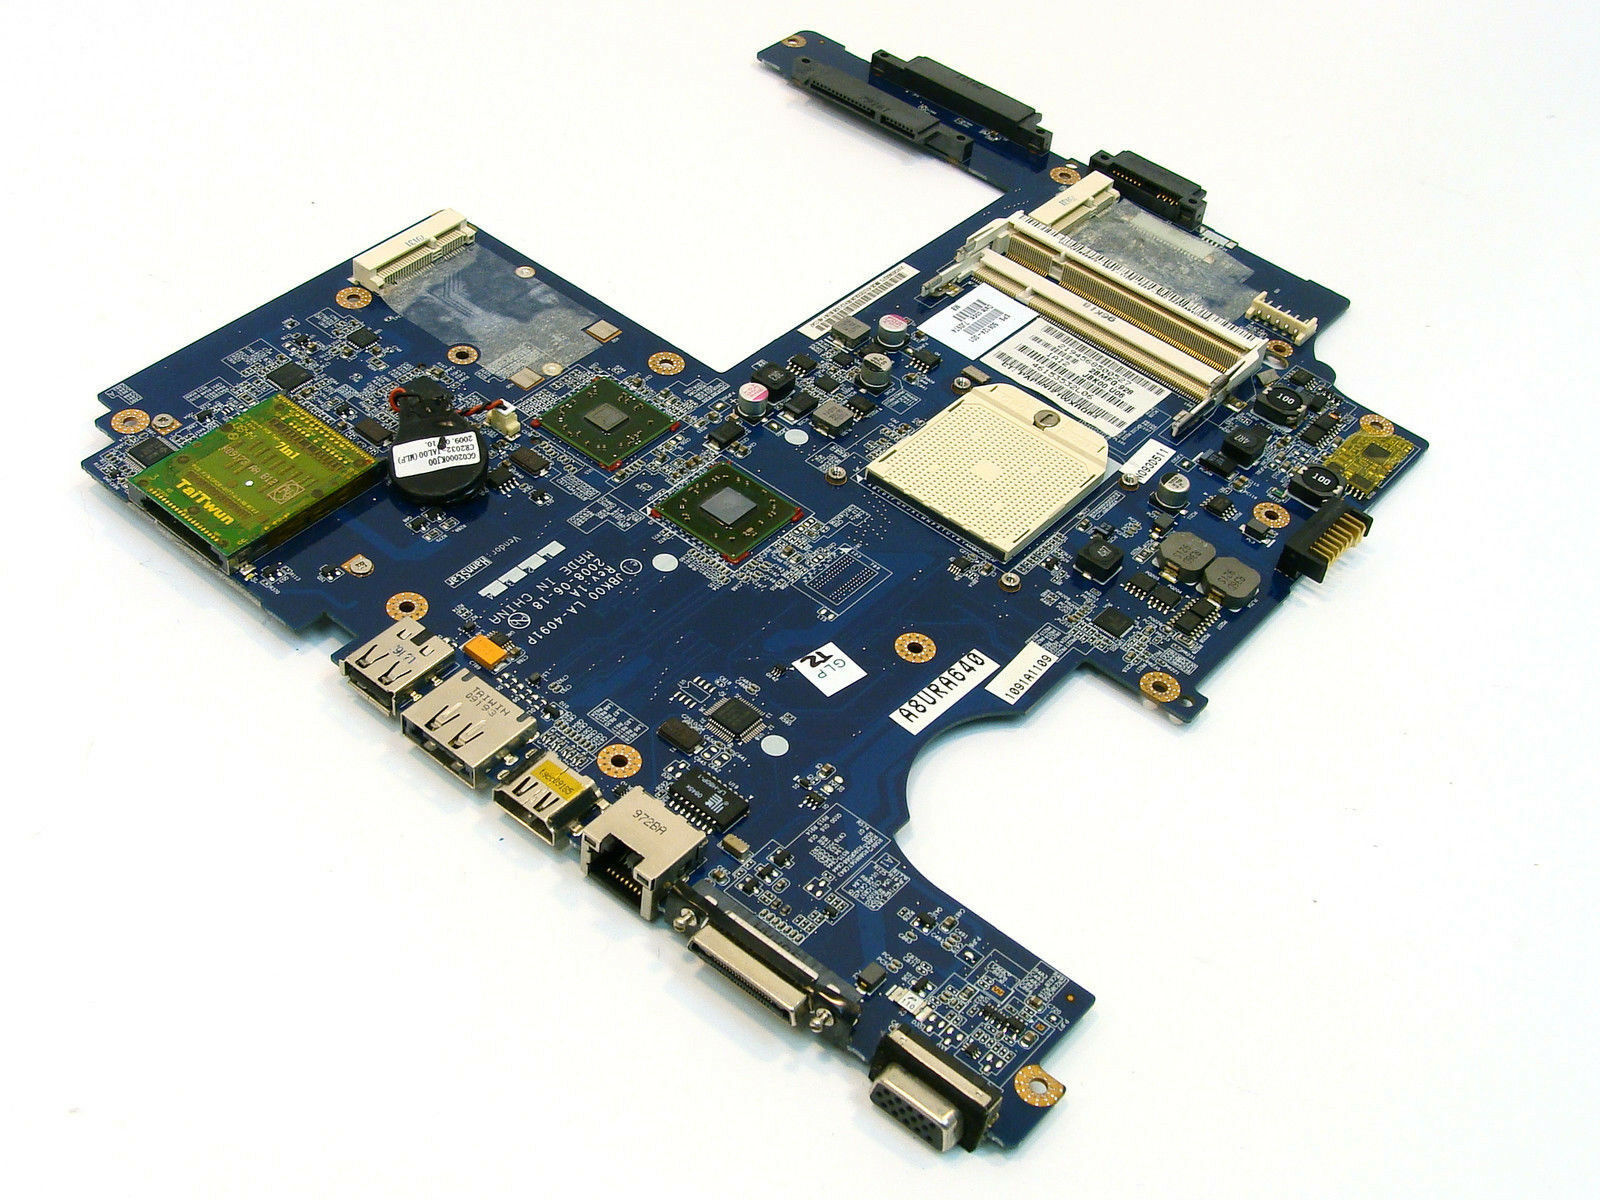 Genuine HP PAVILION DV7-1100 486542-001 Motherboard HDMI Tested Tracking Number is INCLUDED, and Provided w